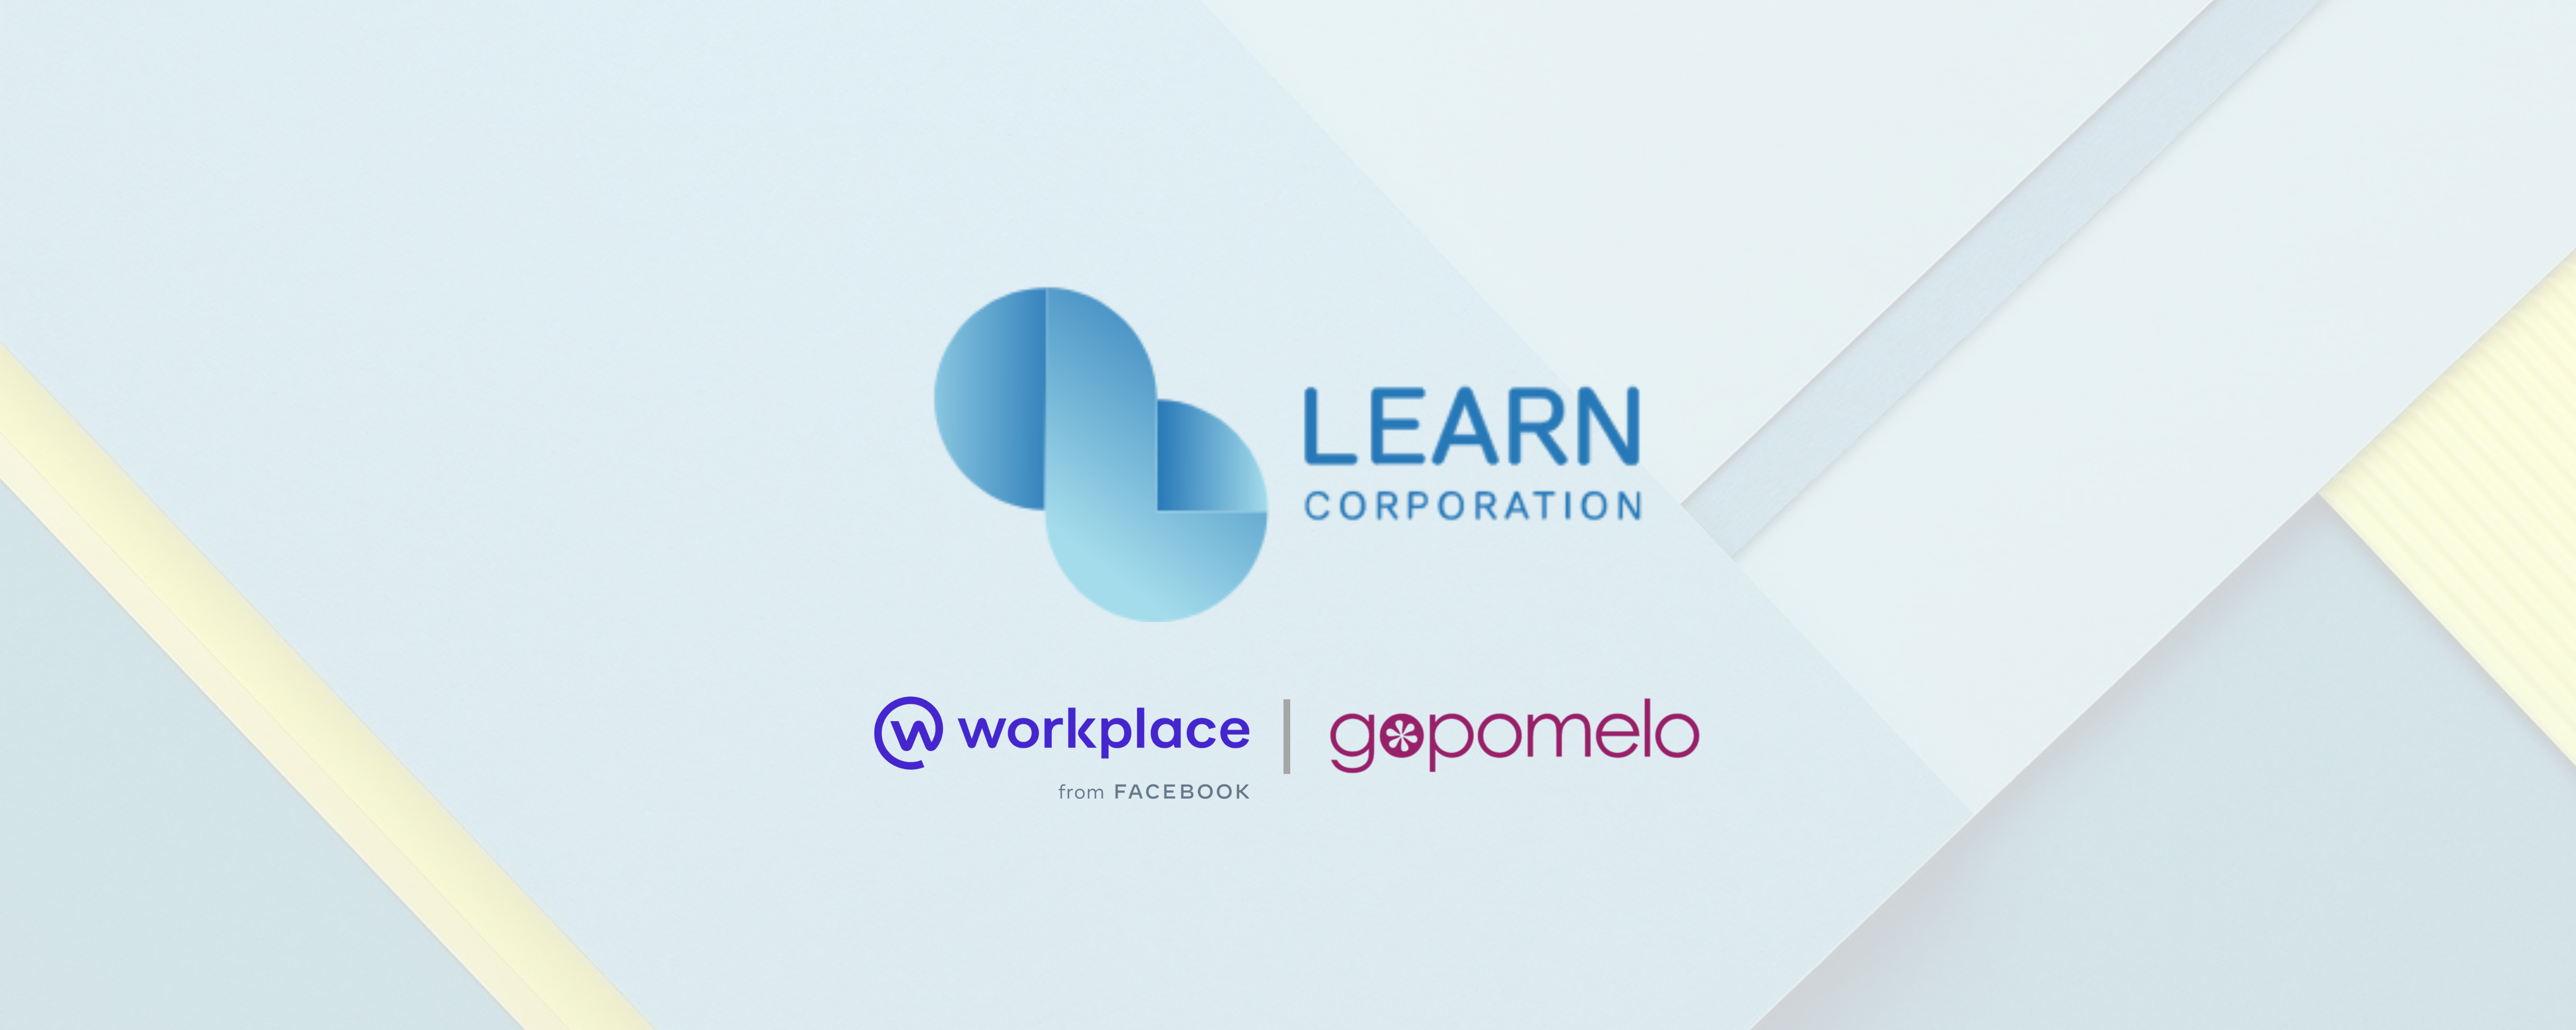 Workplace: Learn Corporation Shared their Thoughts about Workplace from Facebook and GoPomelo